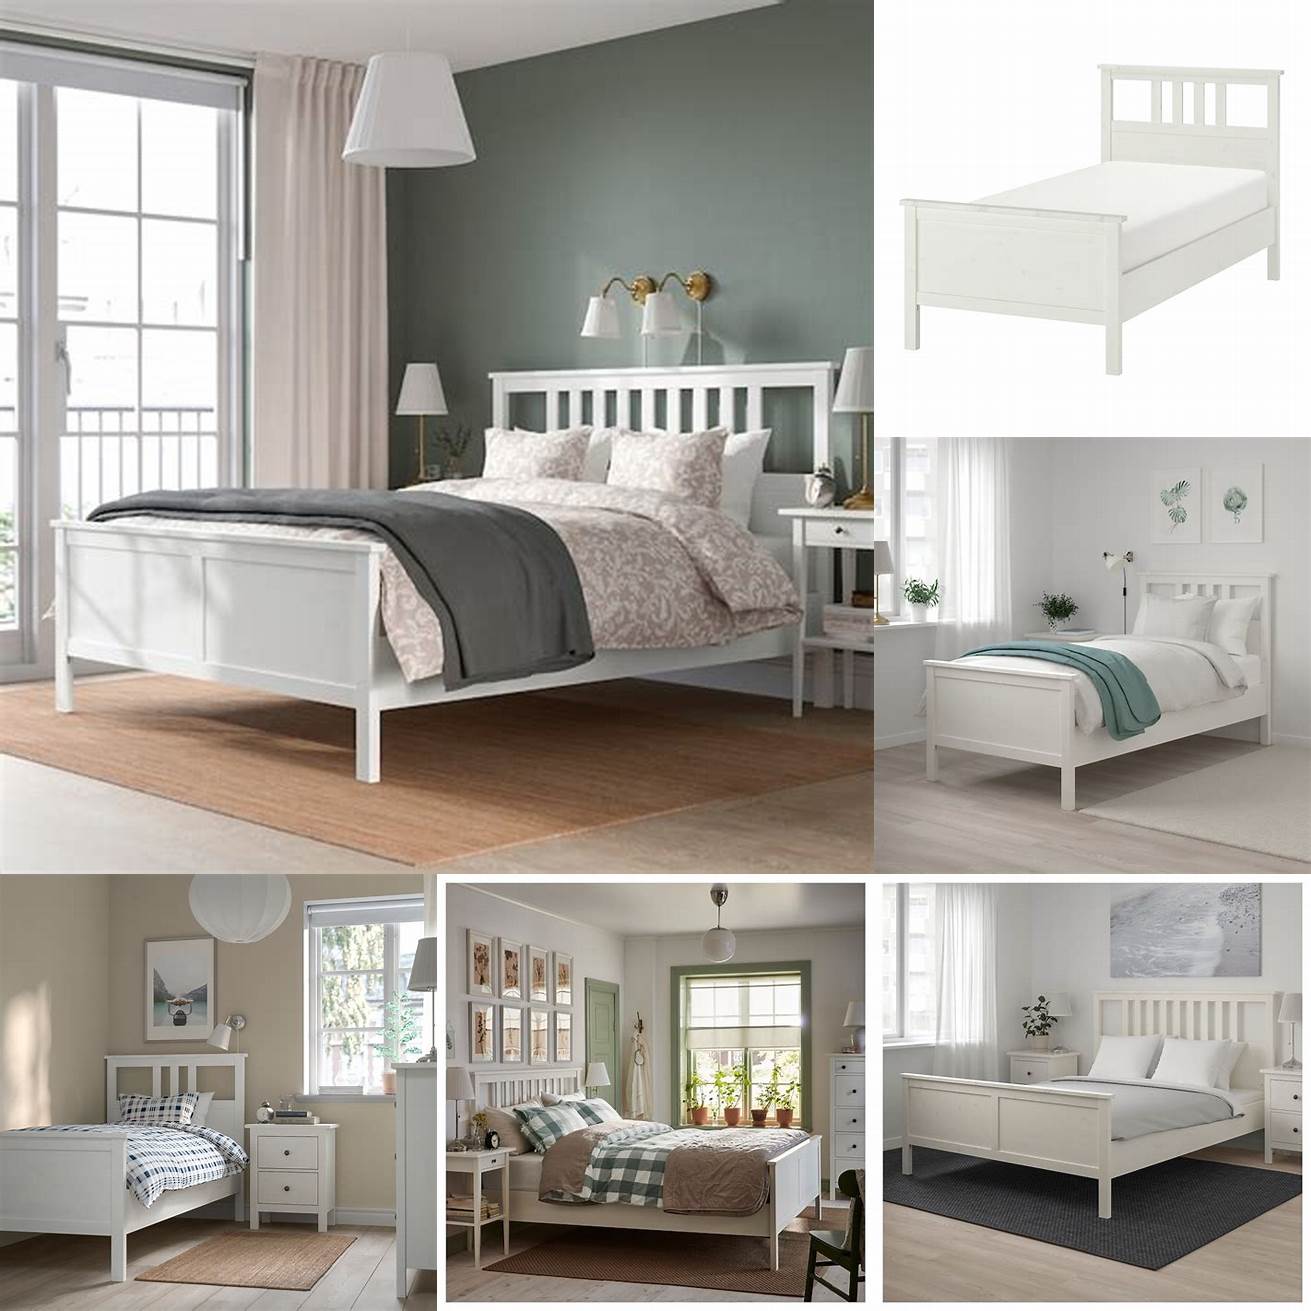 The Hemnes Bed Frame in white stain color